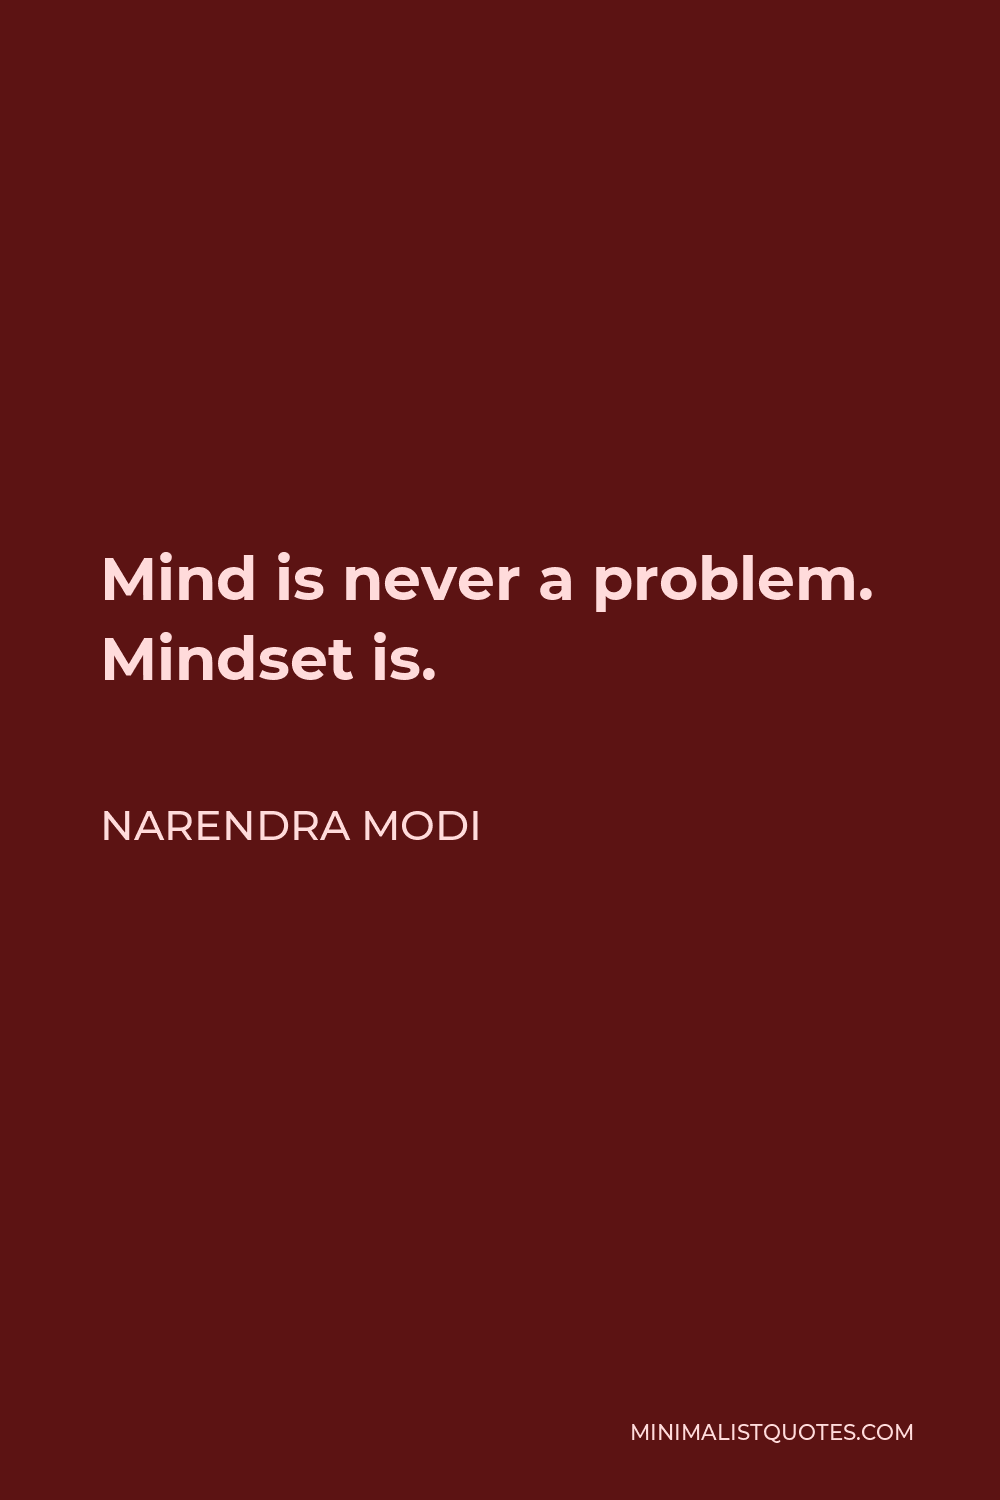 Narendra Modi Quote - Mind is never a problem. Mindset is.